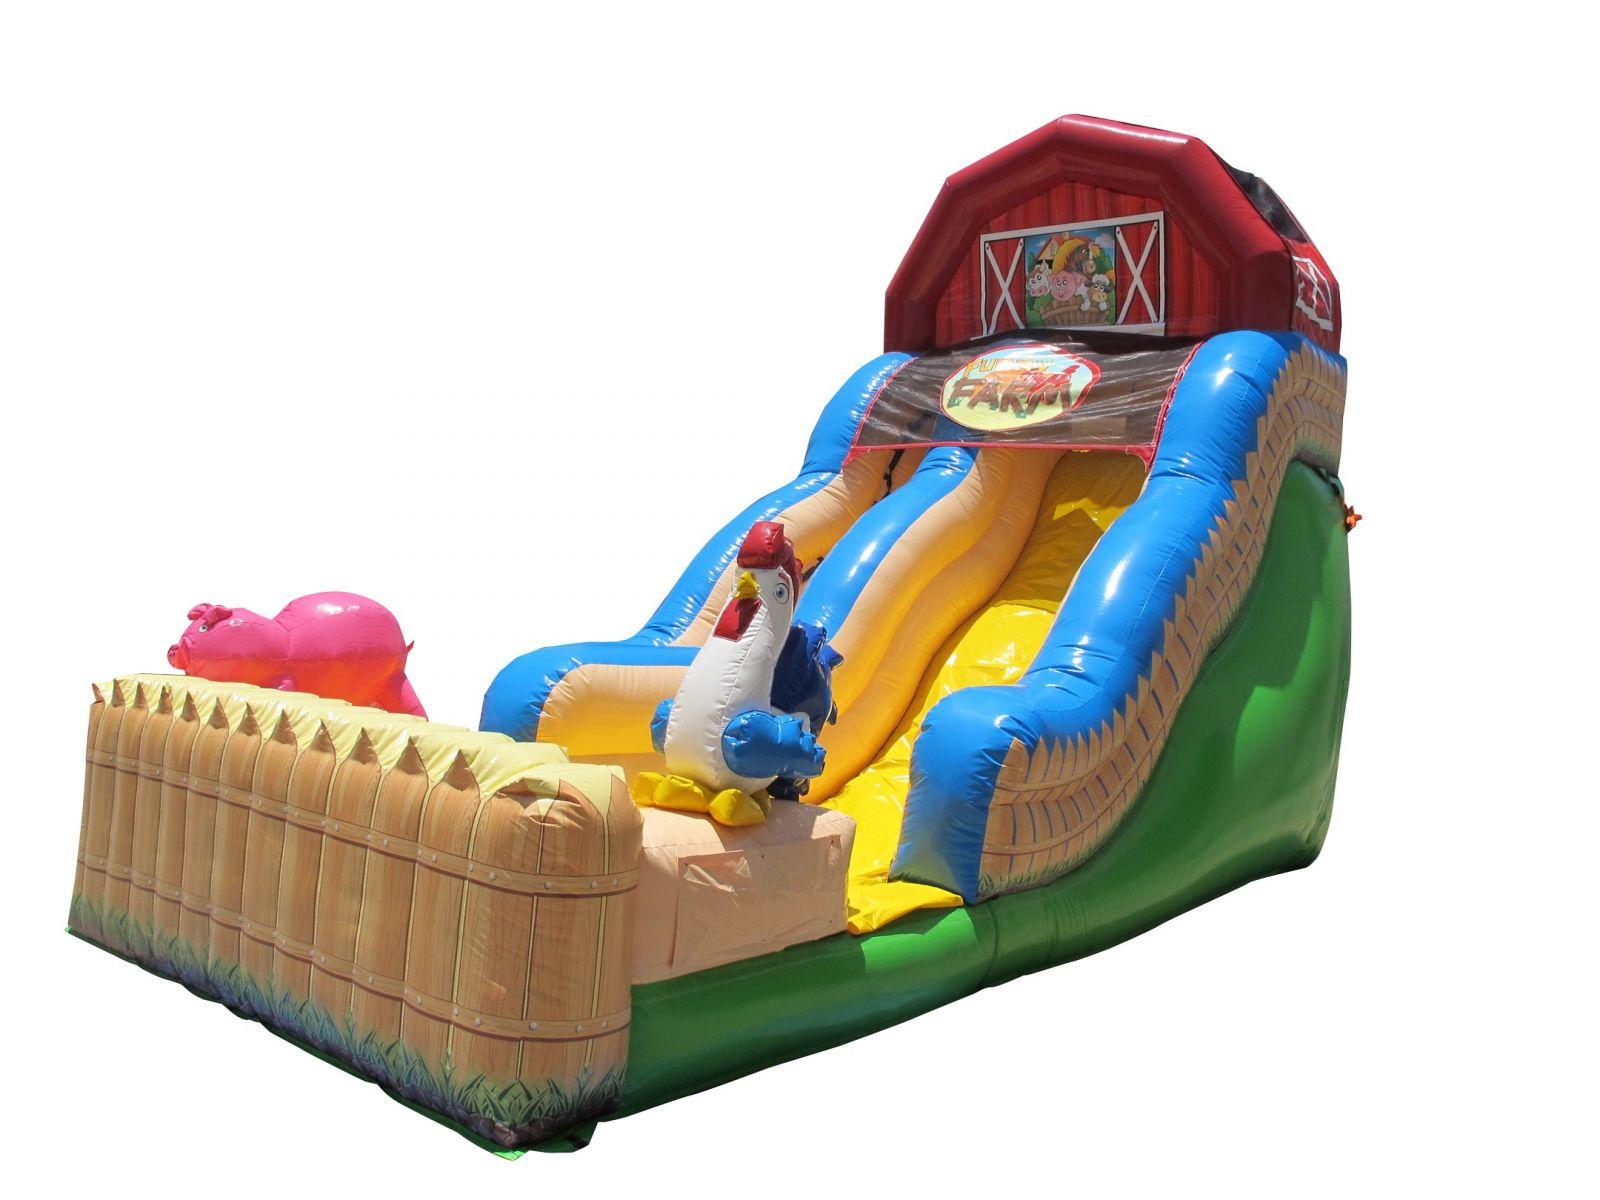 Funny Farm Barnyard Themed Inflatable Water slide Rental Chicago IL